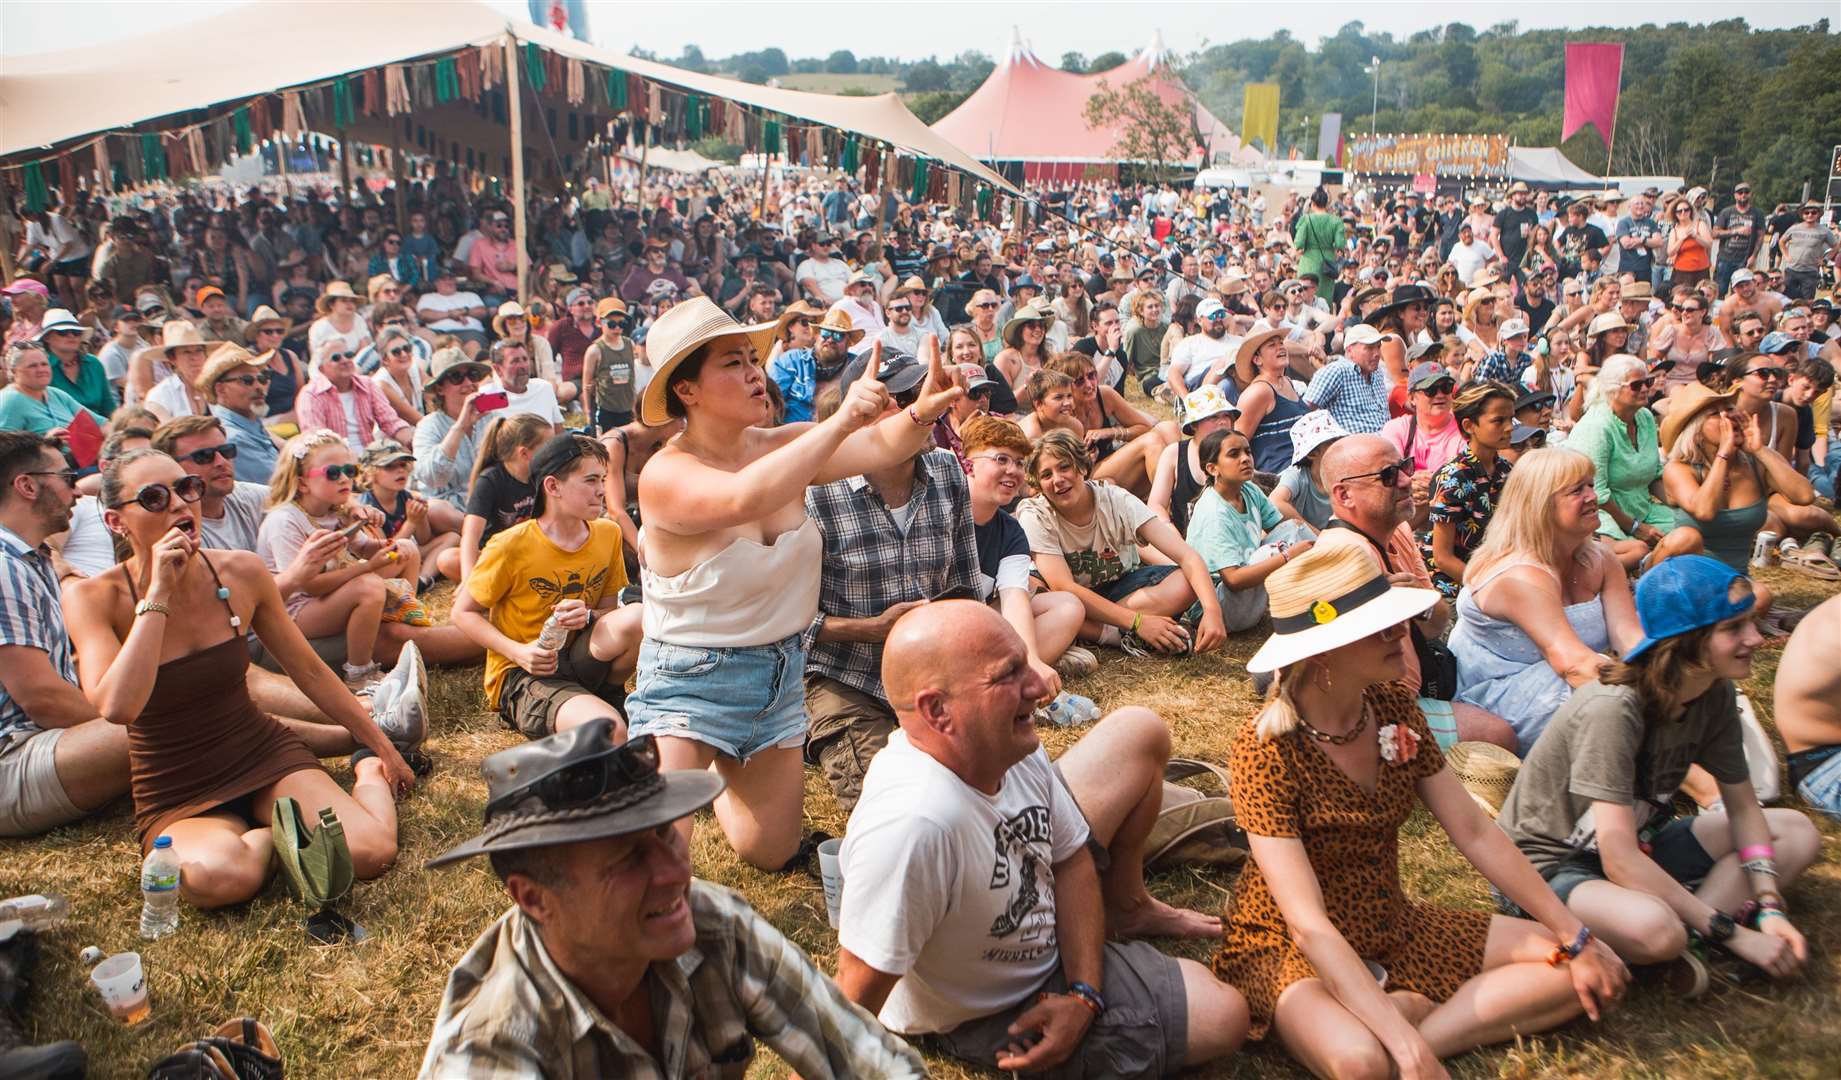 Dads can enjoy live music, BBQ food, motorbikes and late-night bars at this year’s Black Deer Festival